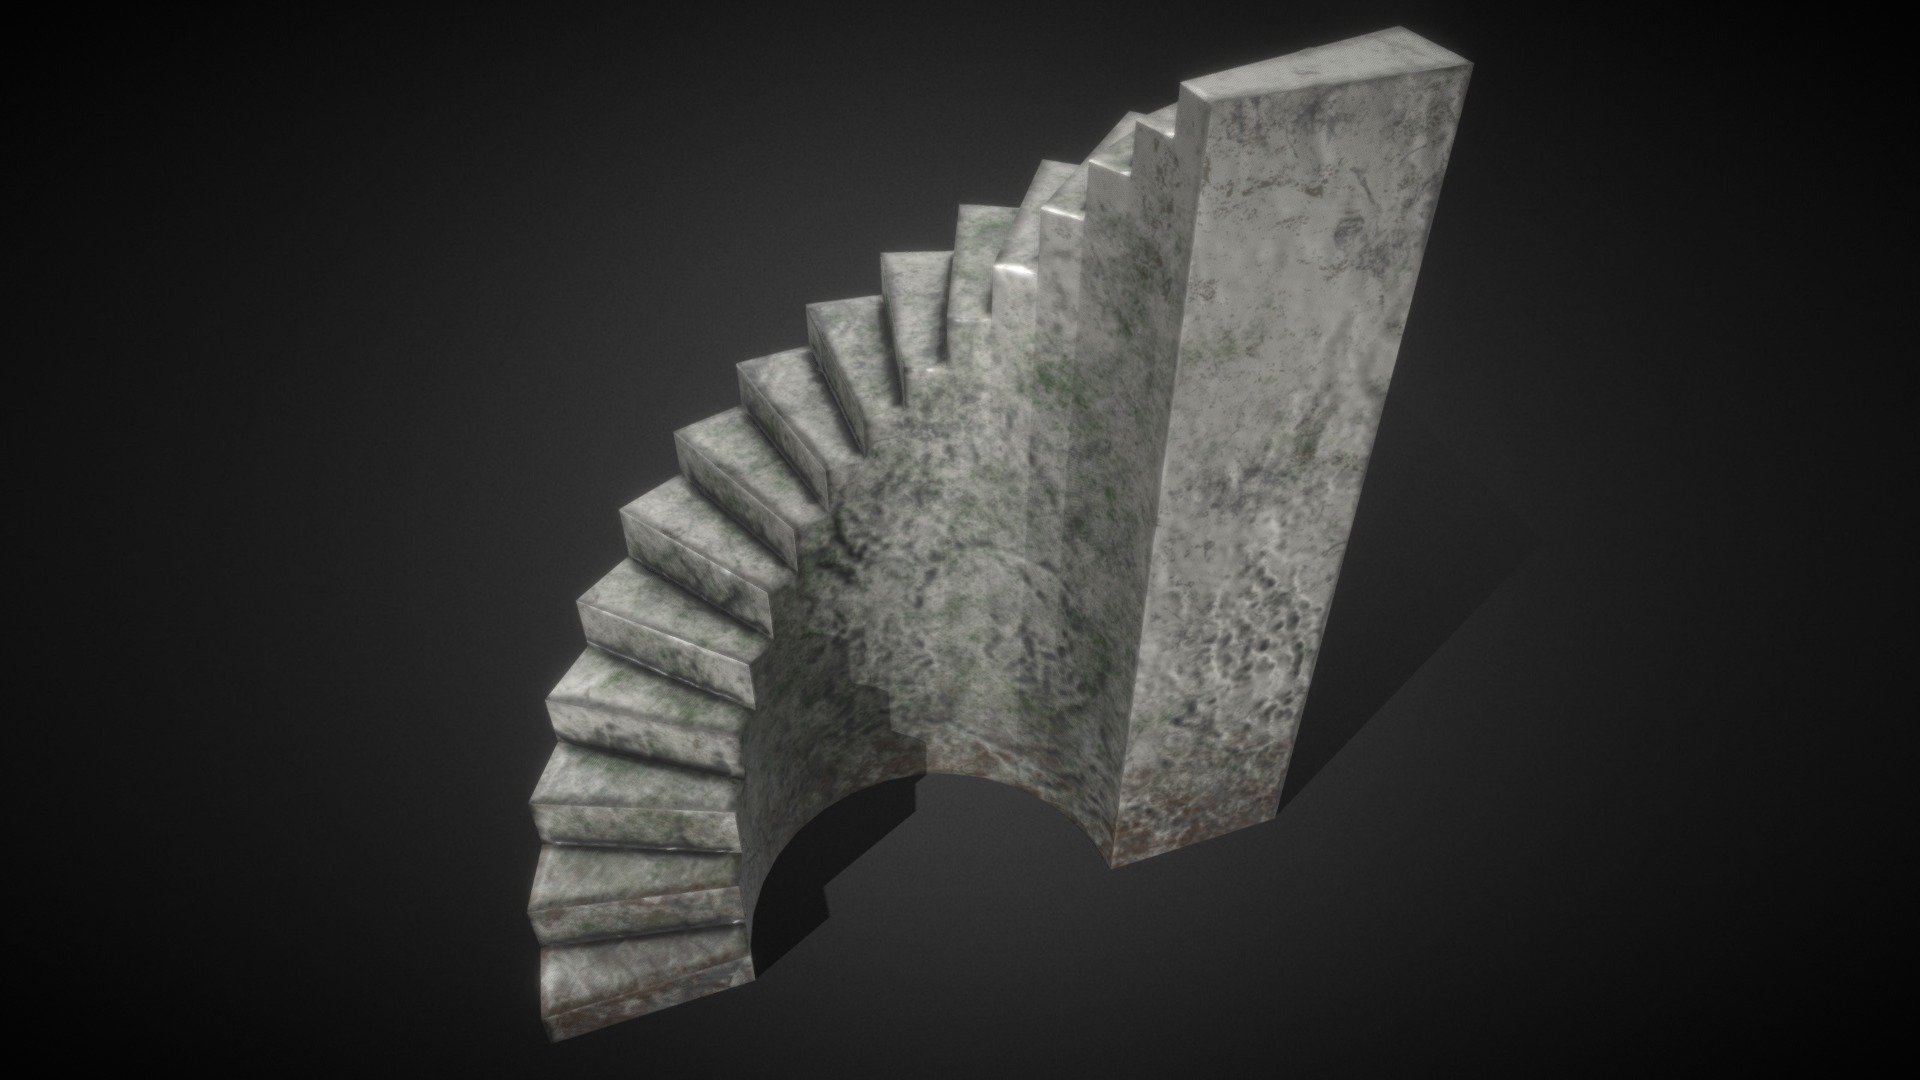 The stone staircase is made in a floor circle (180 degrees). The blender file has high poly and low poly models, ask me if you need i (Blender, FBX, OBJ and STL formatst).

Textures include basemaps (diffusion), normal maps, and roughness maps.

Texture resolution: 4096 pixels

Amount of points: 338 vertex - Stone circular stairs - 3D model by jagoda 3d model